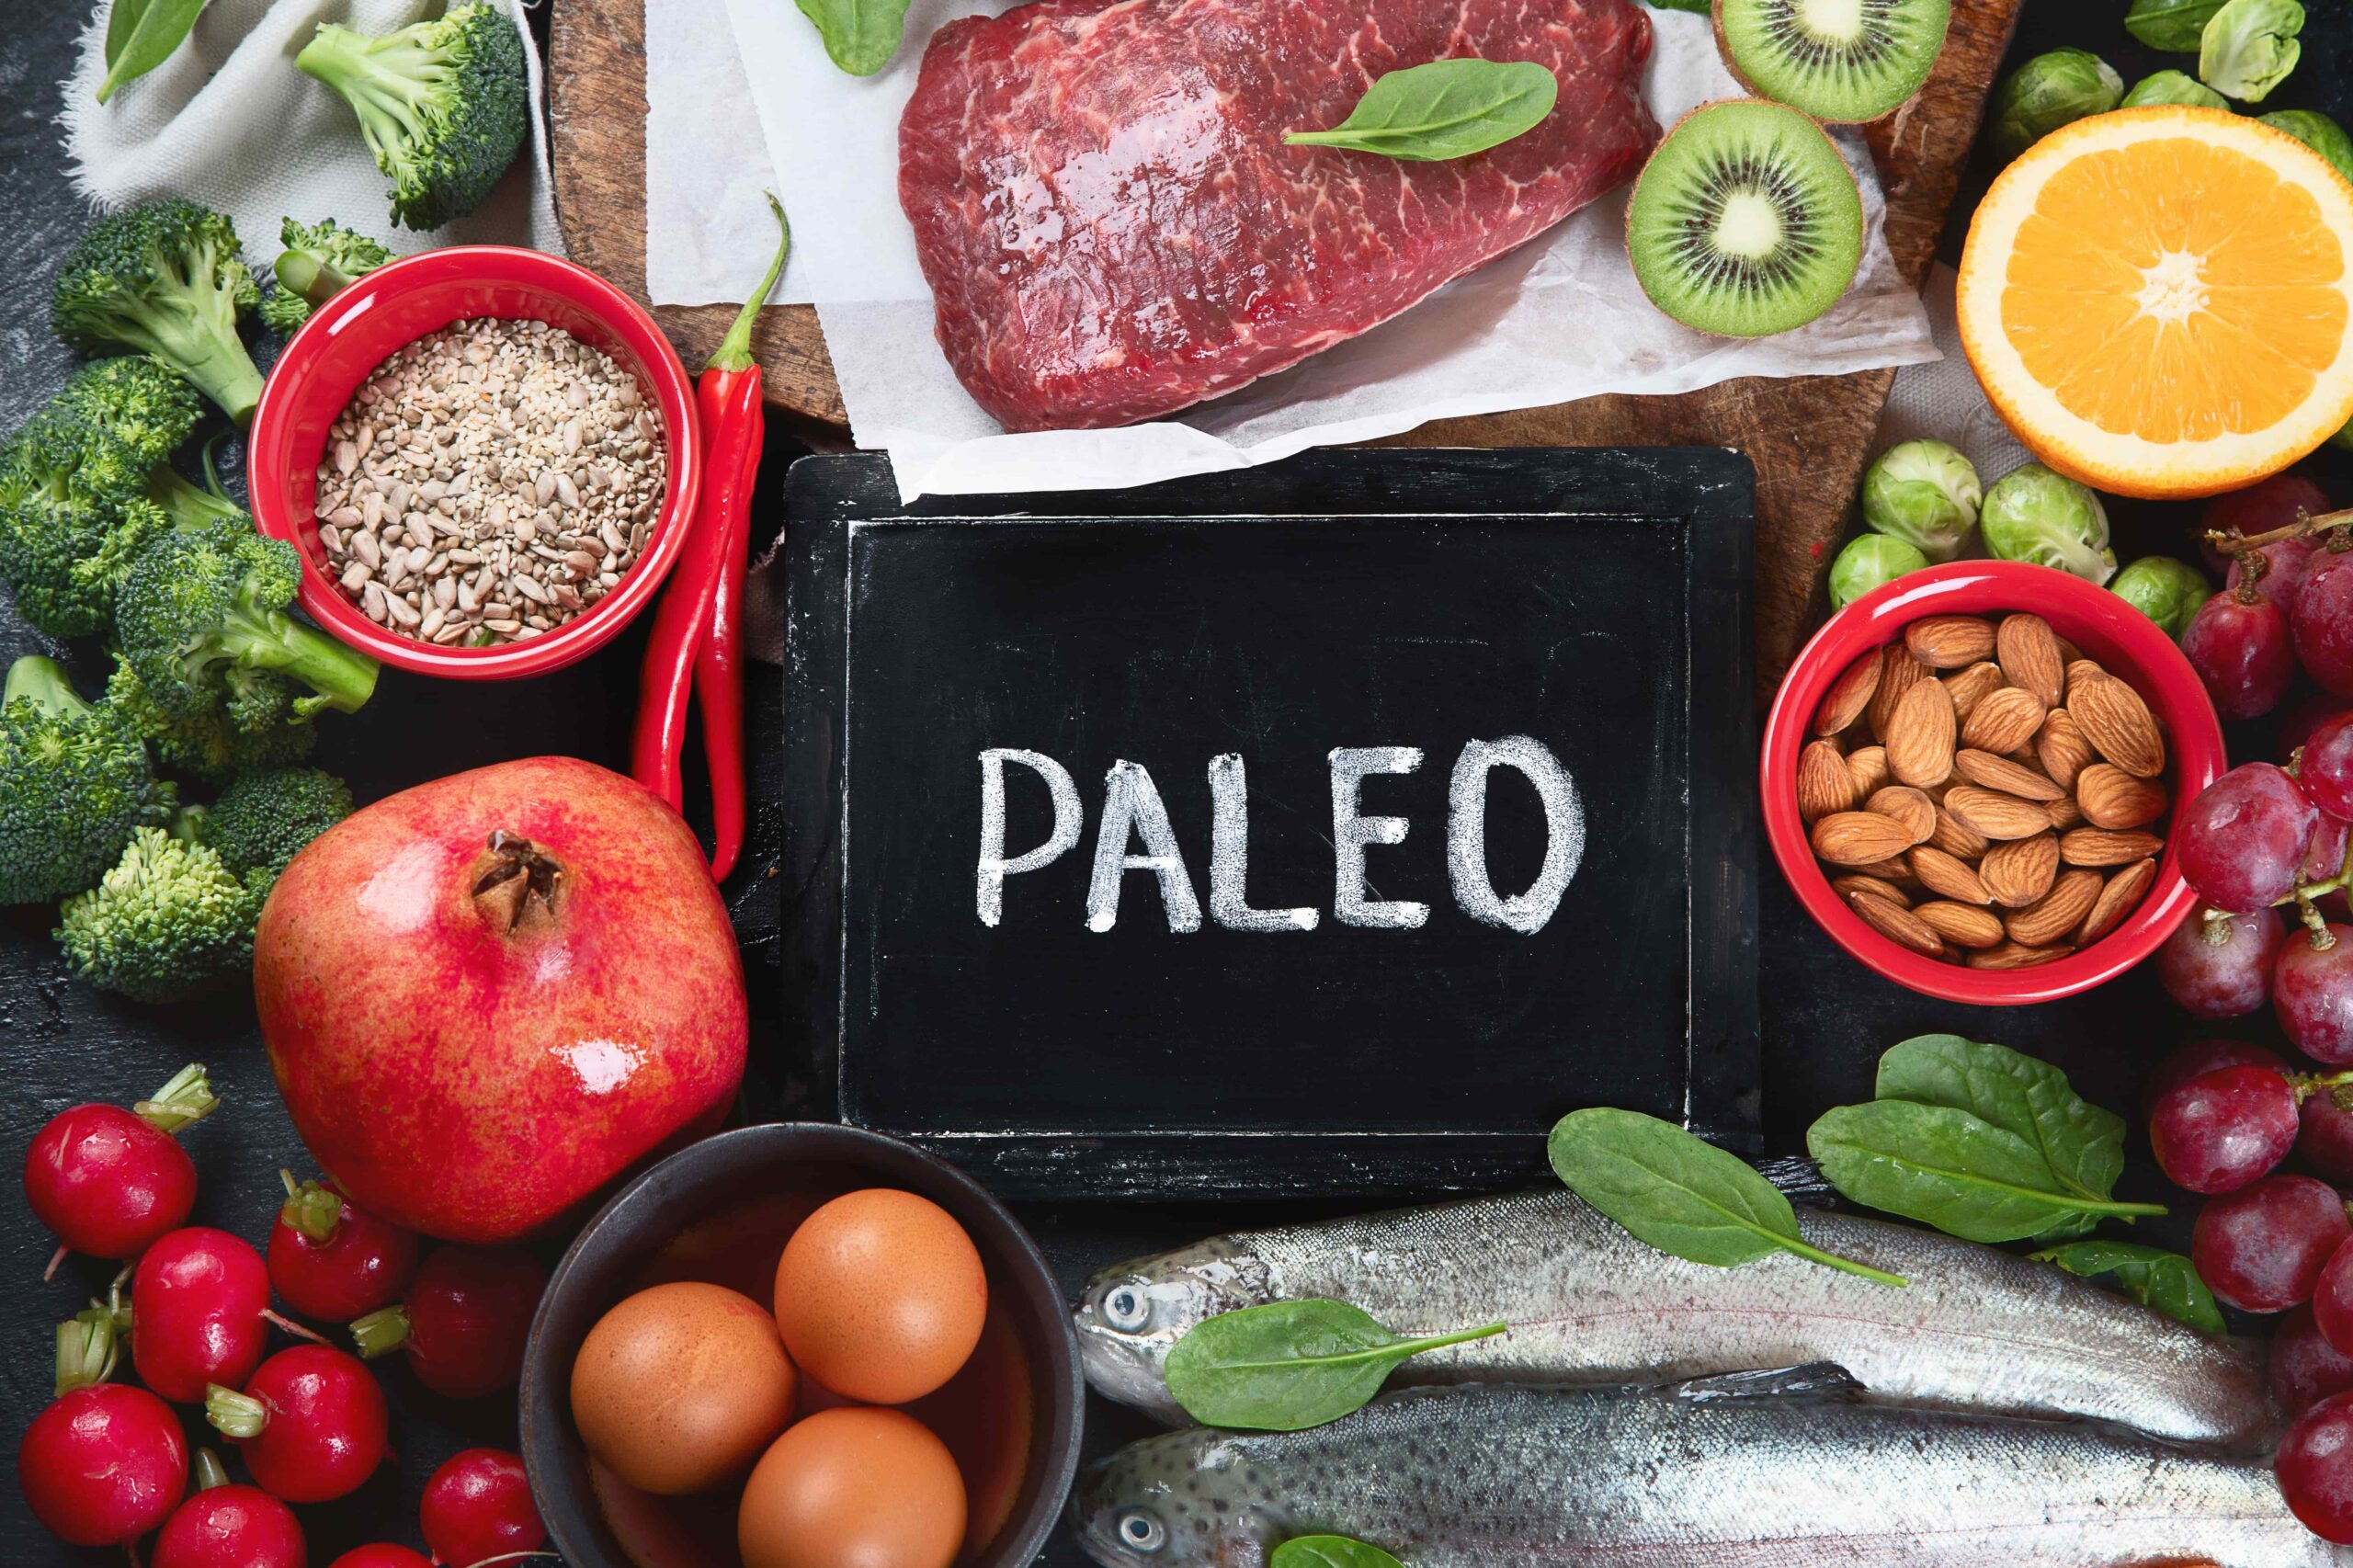 How the Paleo Diet Works